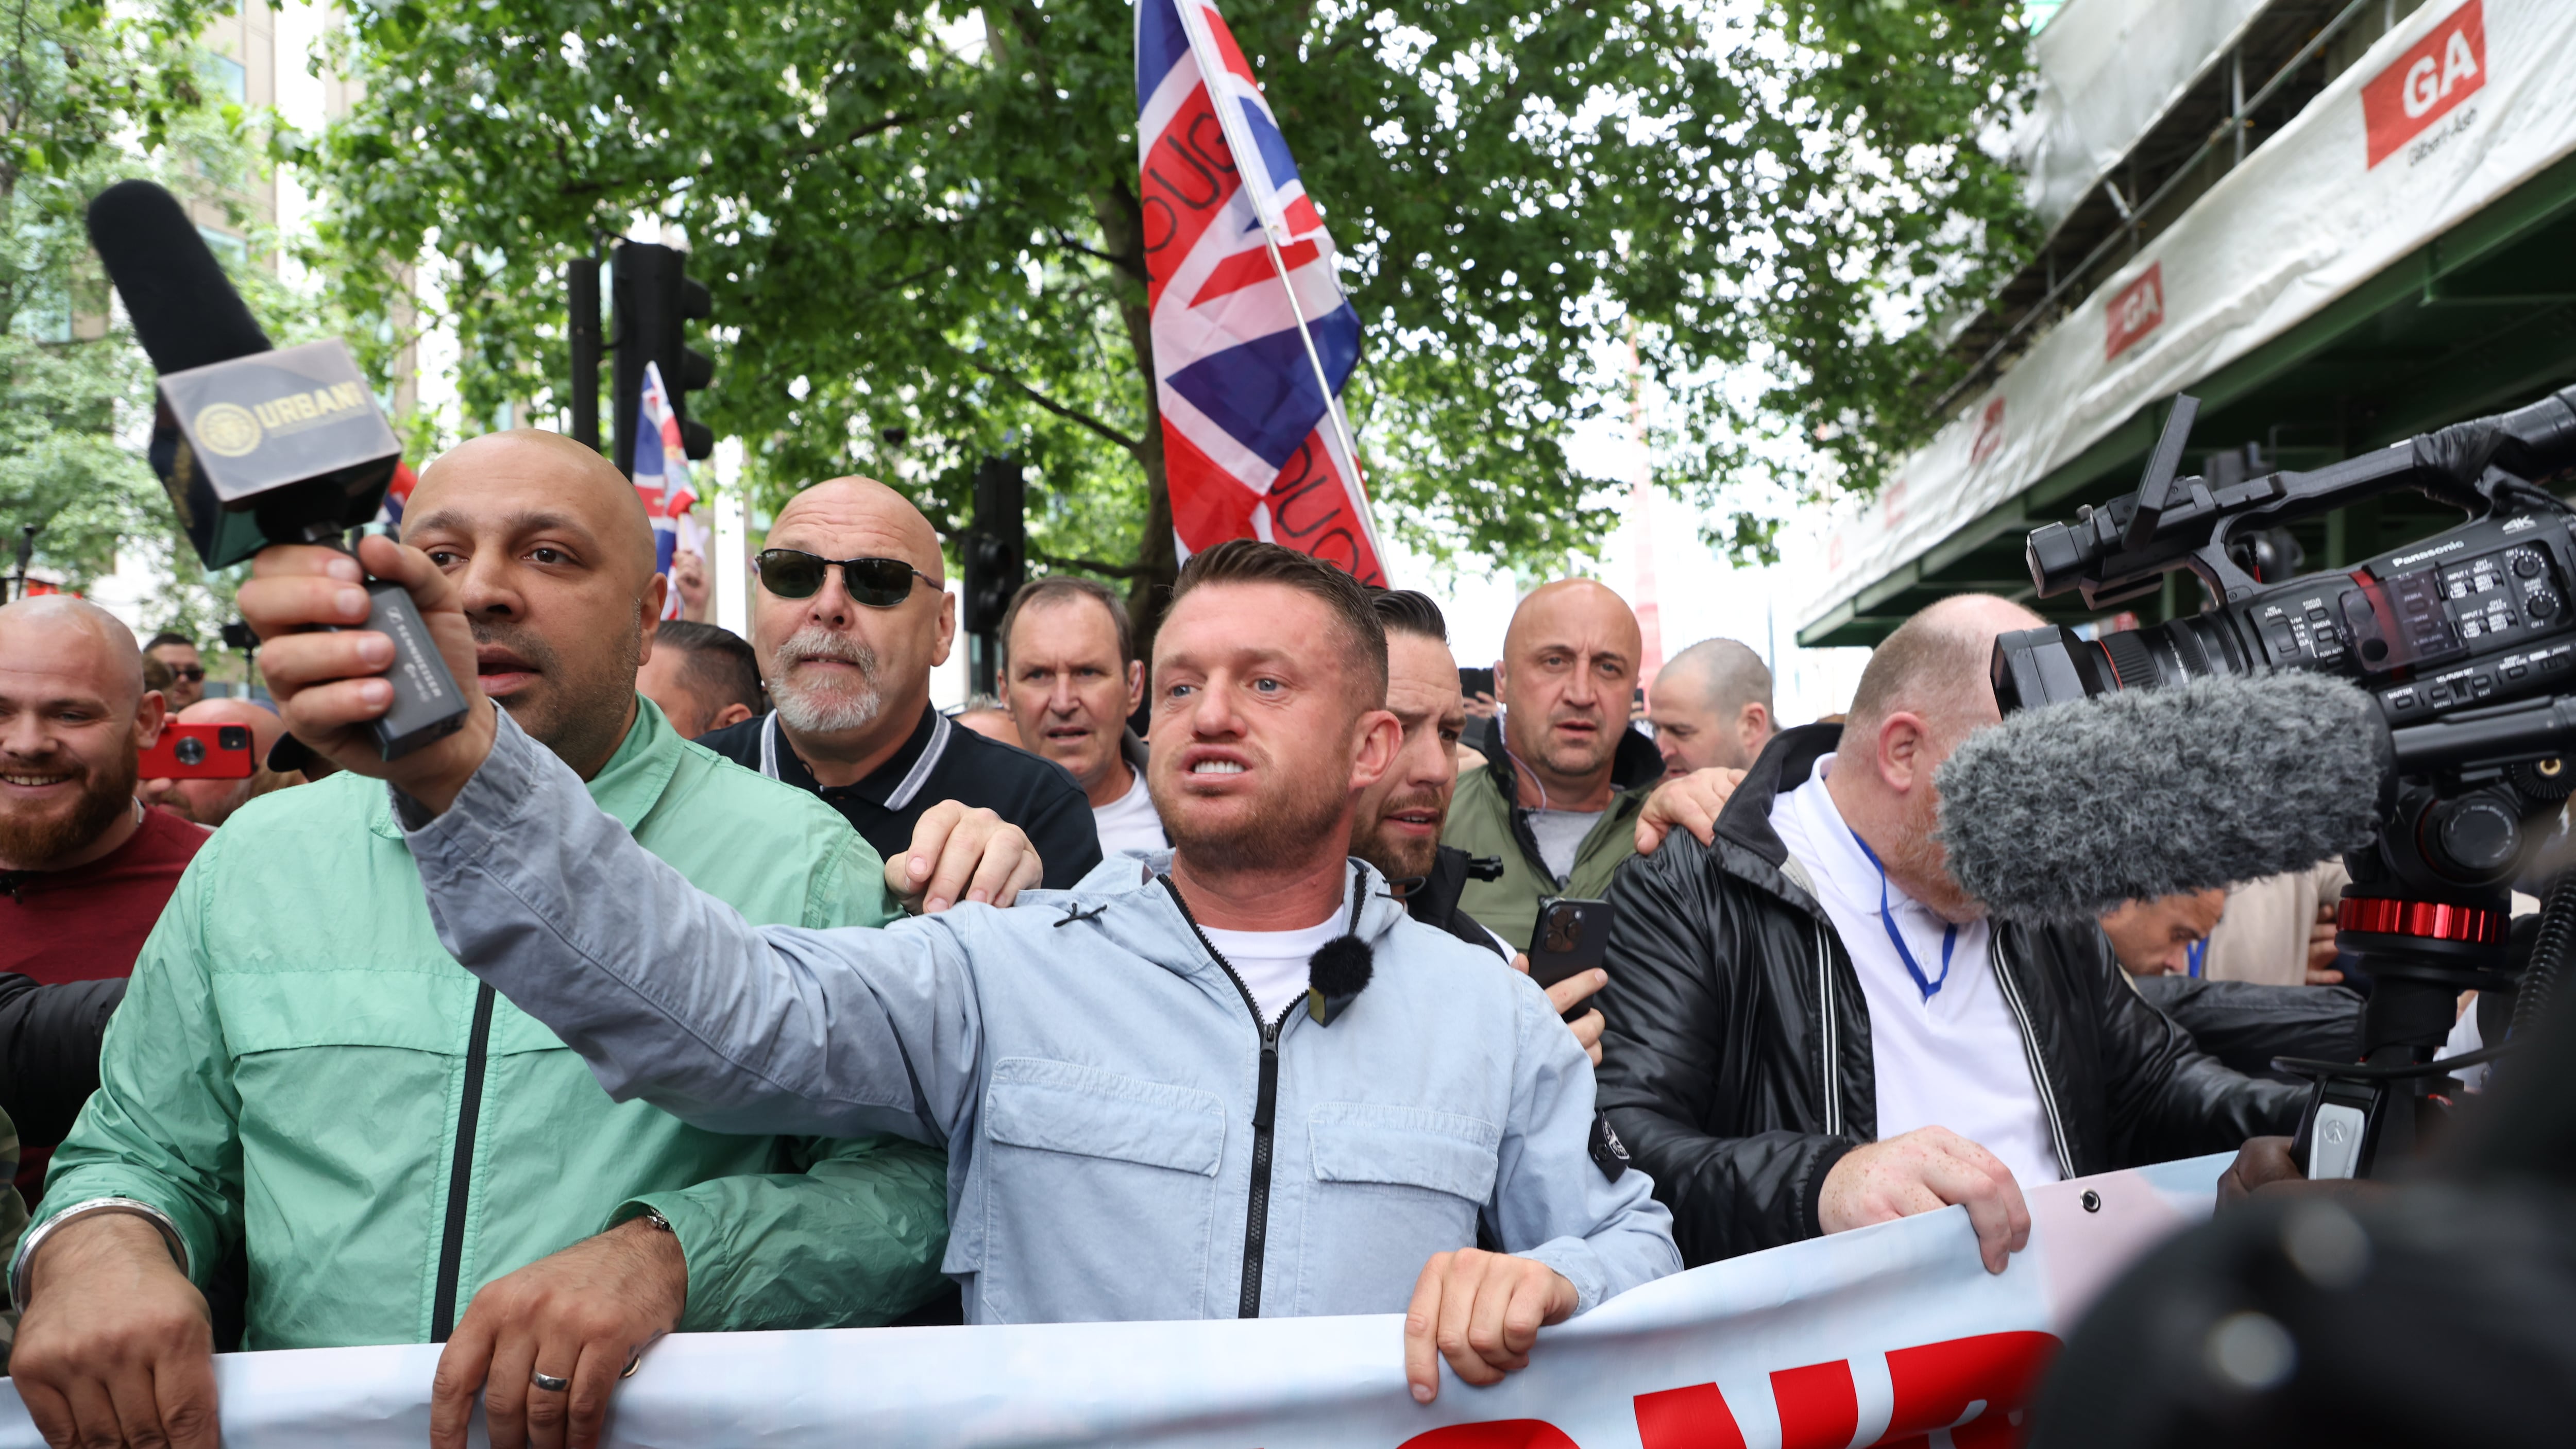 Tommy Robinson, whose real name is Stephen Yaxley Lennon, leads a protest march through London